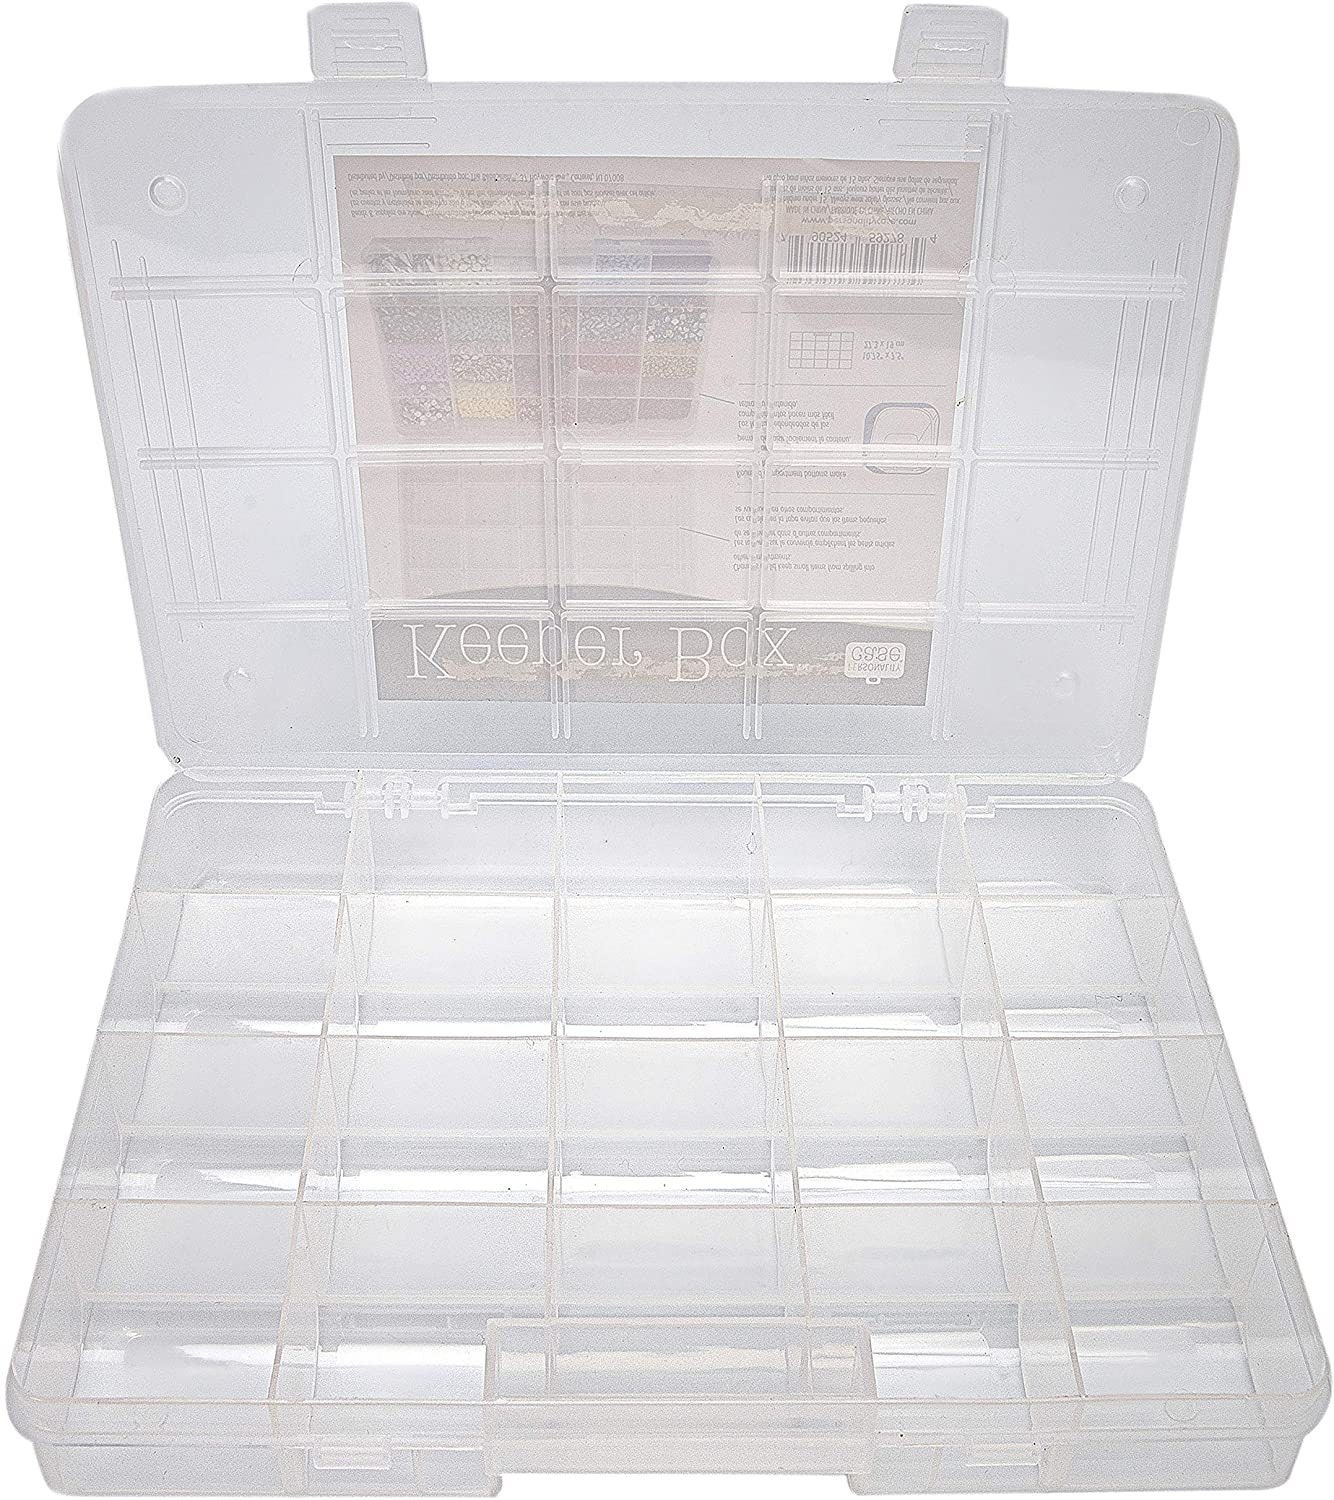 with exclusive discounts Bead Storage Box - 28 Individual